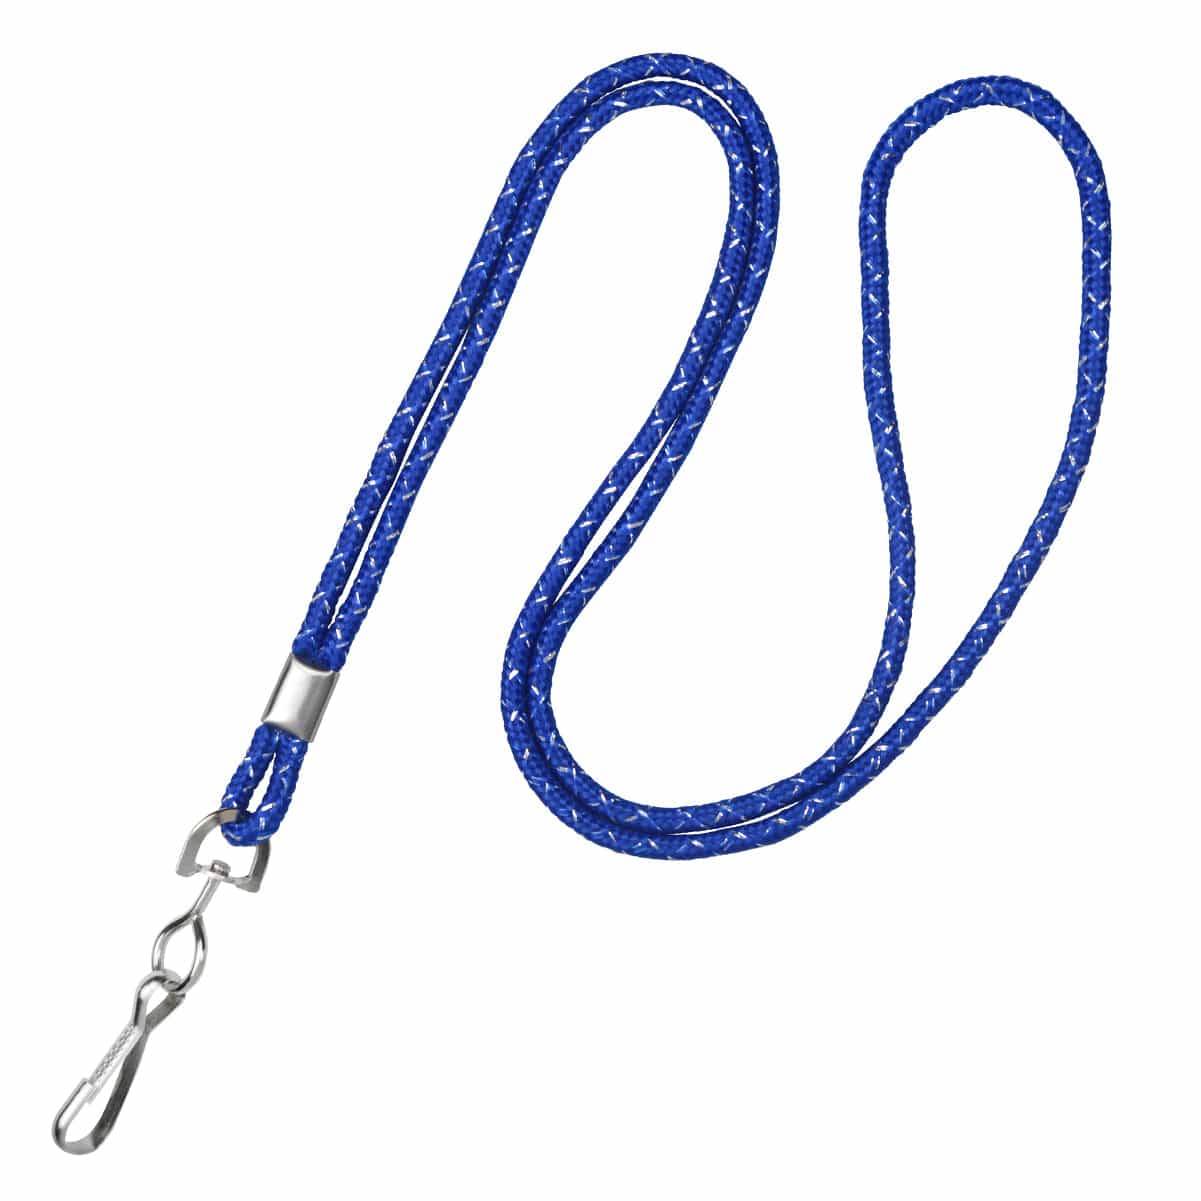 A Silver Metallic Round Non-Breakaway Lanyard With Swivel Hook - Economy Lanyards with Pizazz! 2135-302X perfect for holding a VIP pass.